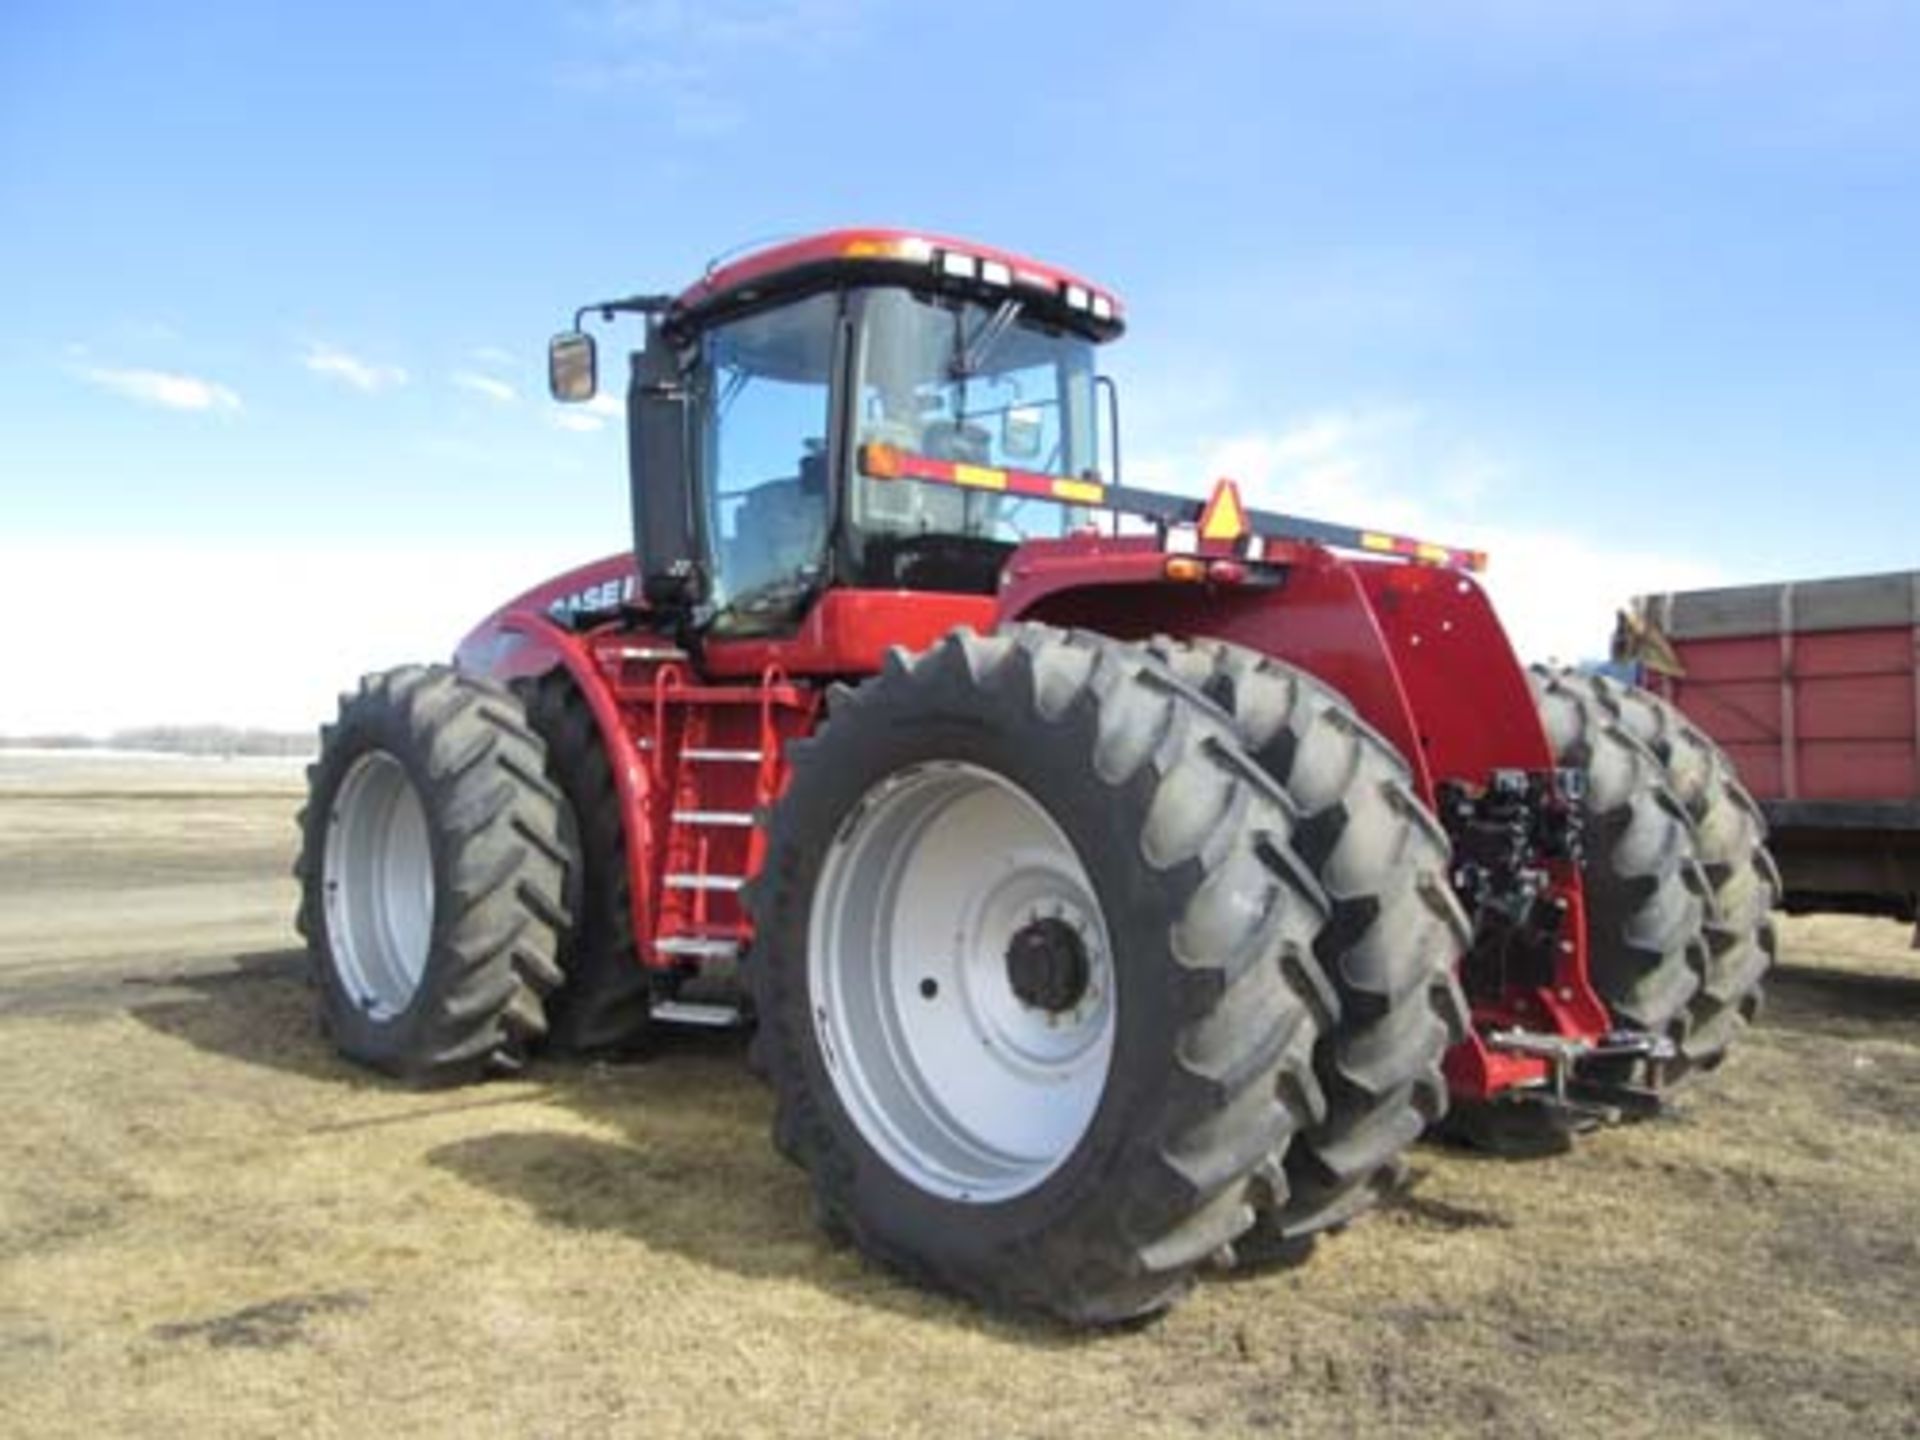 2011 CASE IH Steiger 350 HD 4wd Tractor - Image 2 of 11